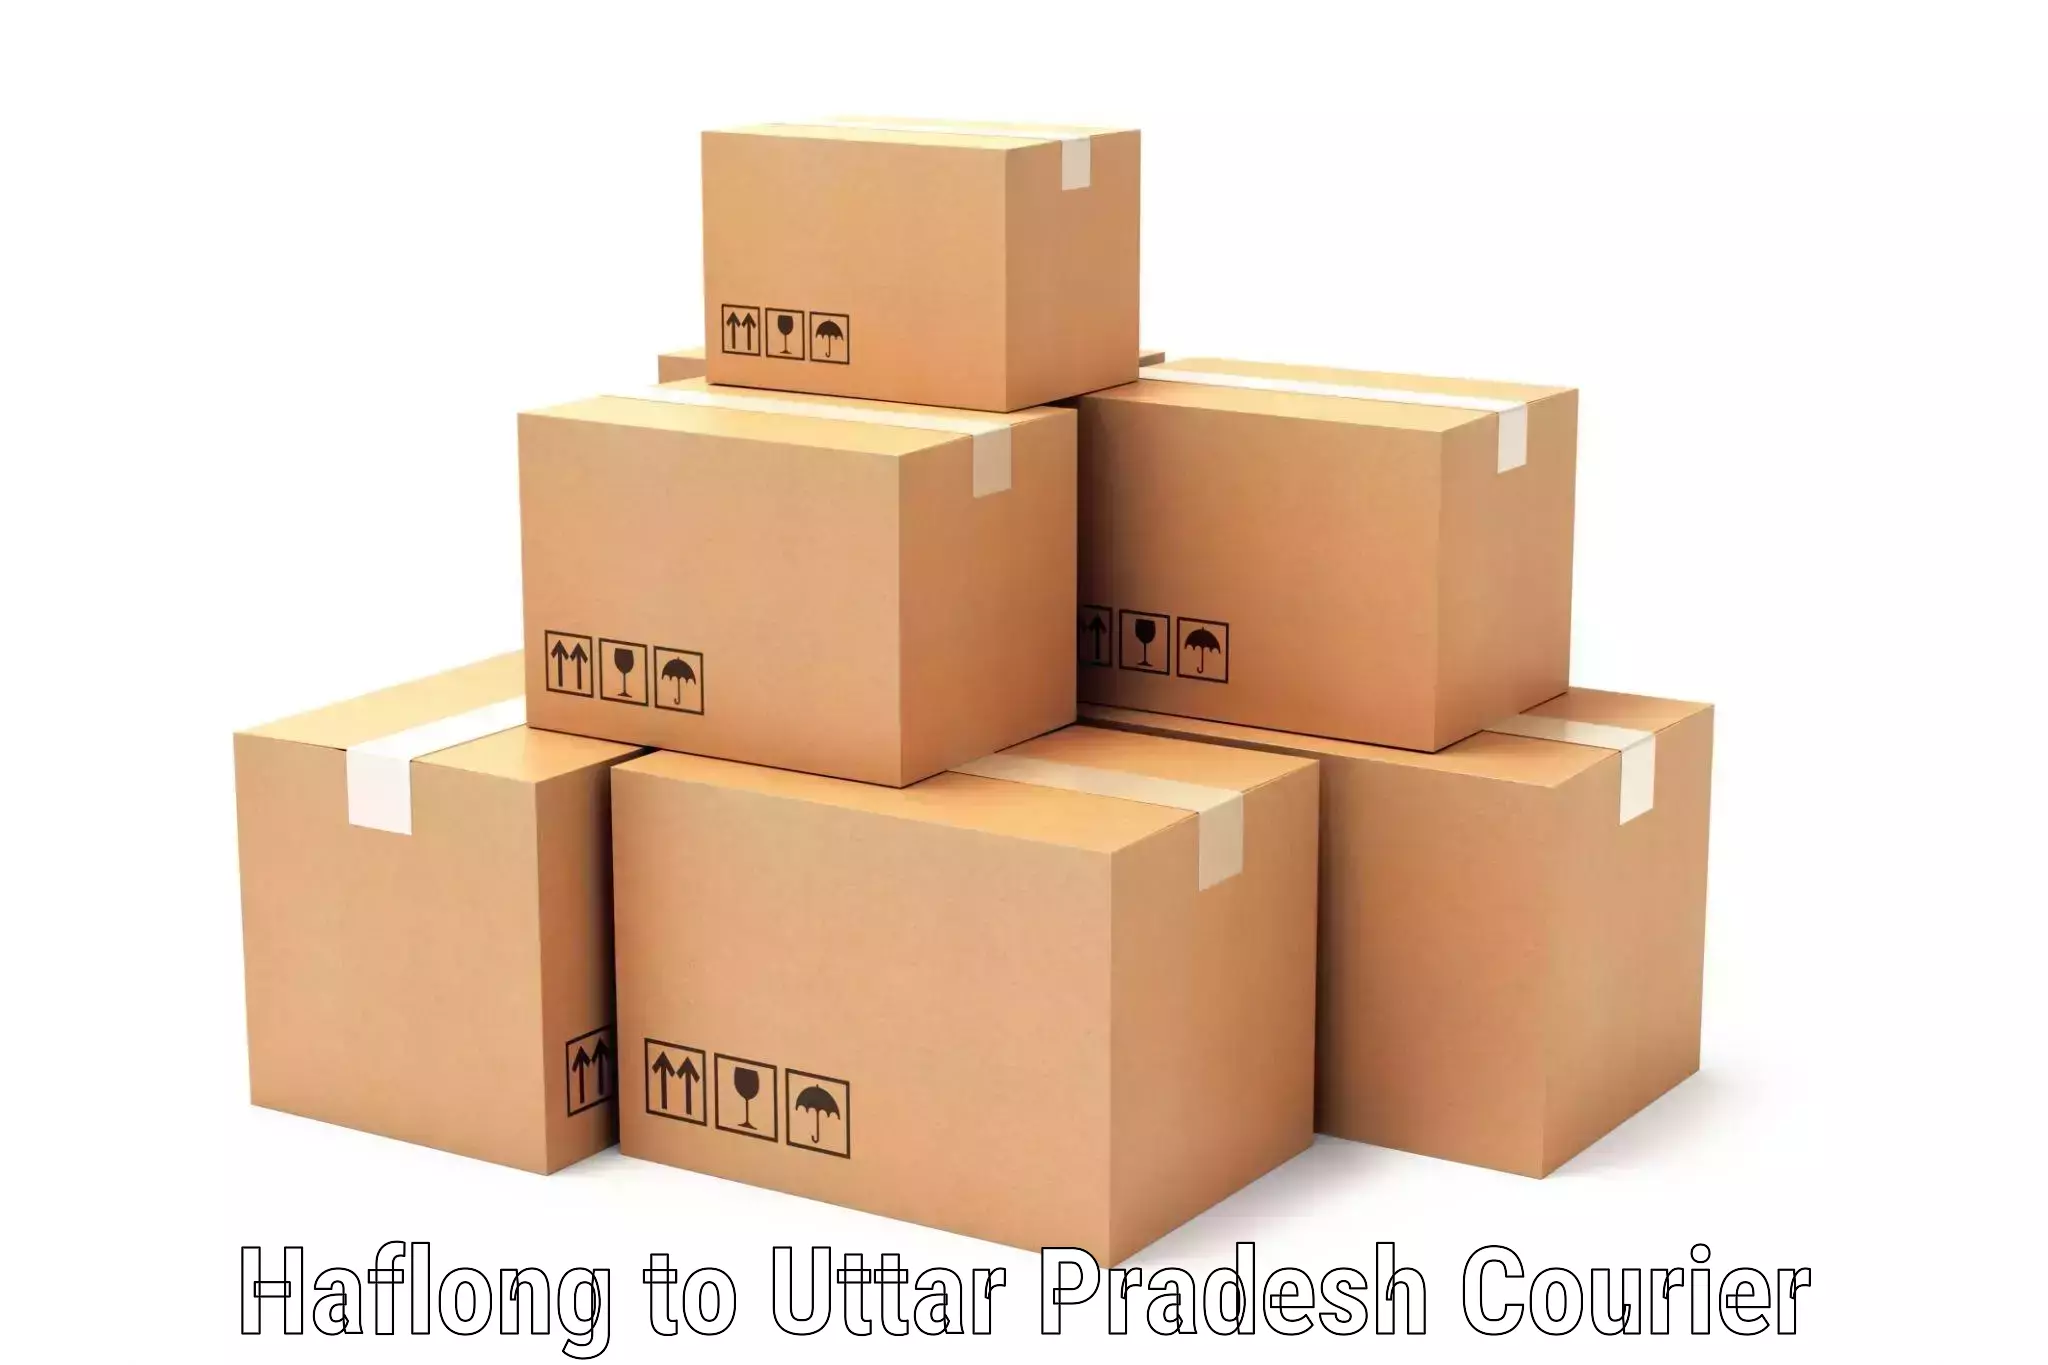 High-quality delivery services Haflong to Gorakhpur